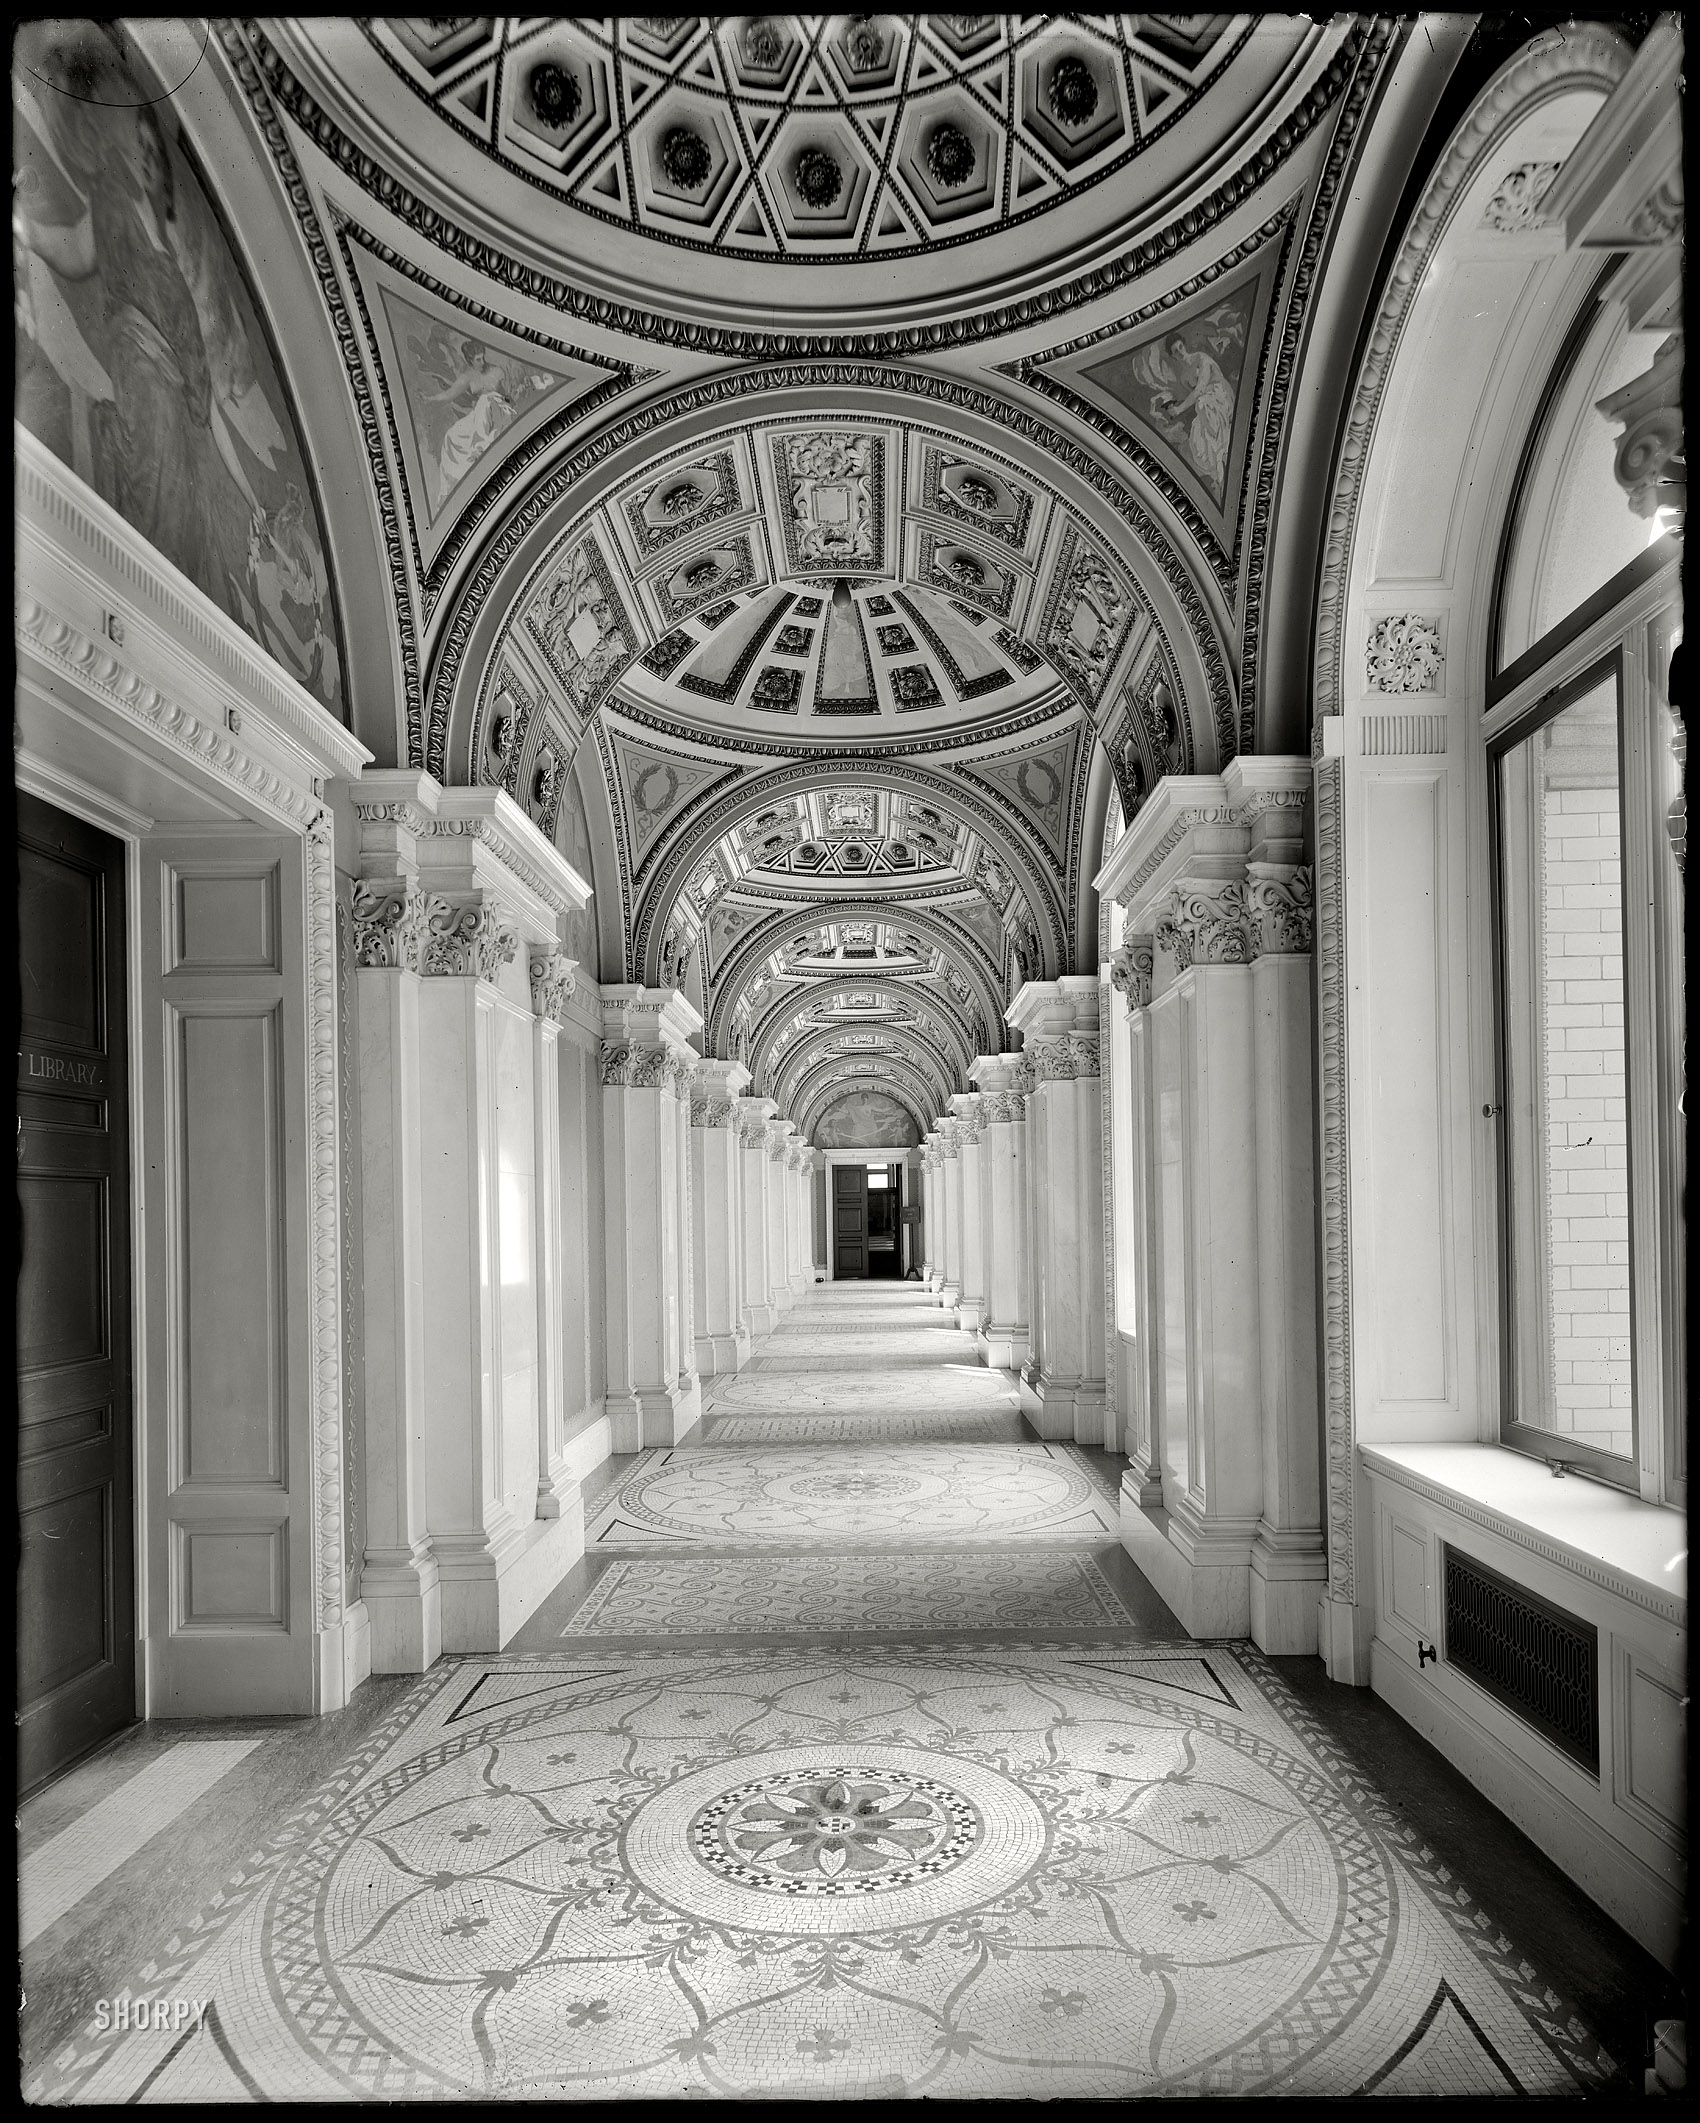 Circa 1908. "South corridor, Library of Congress, Washington, D.C." 8x10 inch dry plate glass negative, Detroit Publishing Company. View full size.